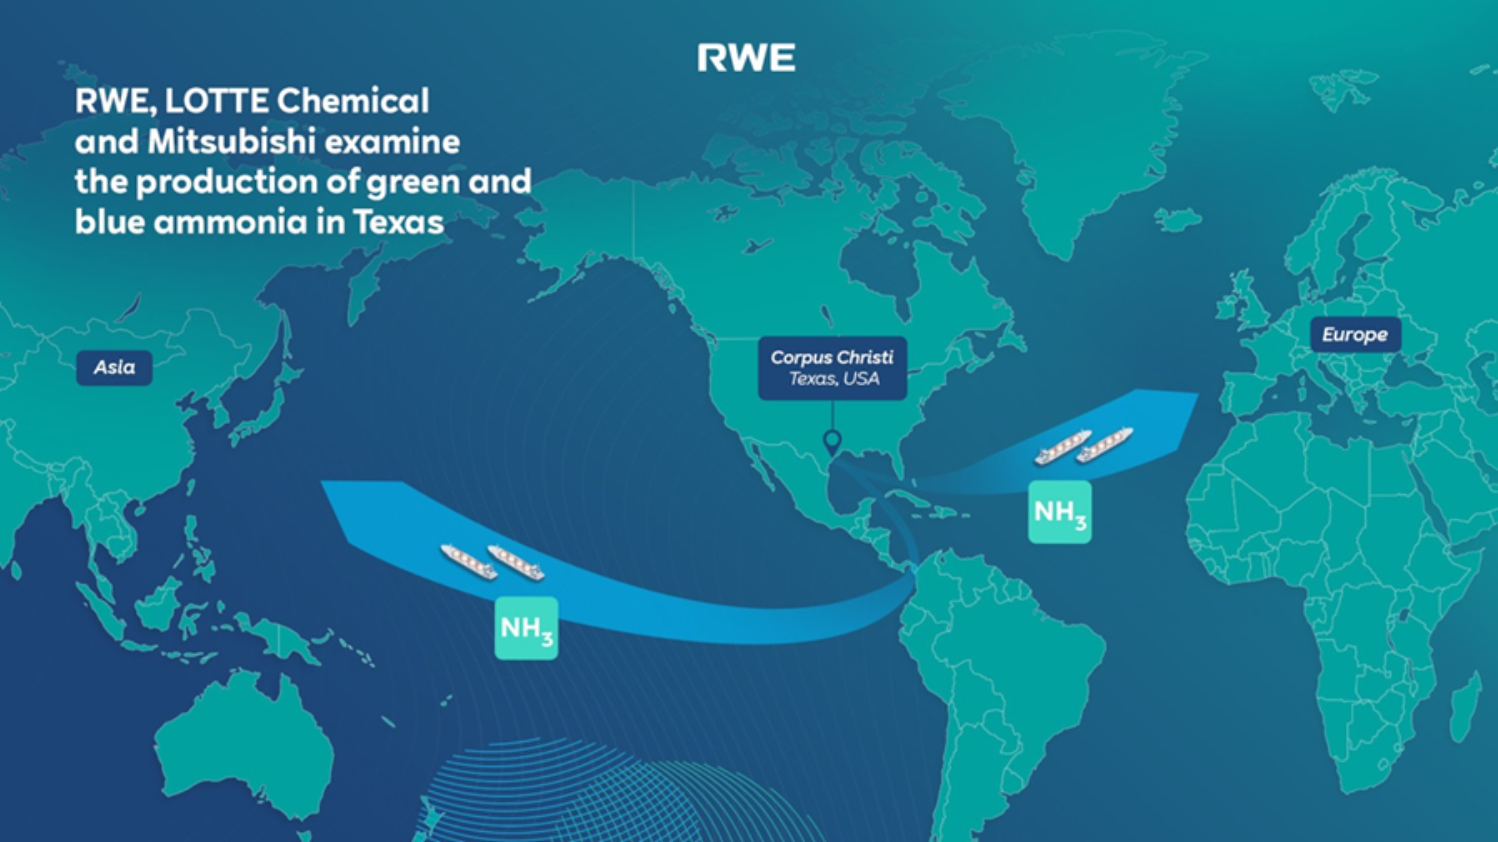 RWE, LOTTE CHEMICAL Corporation and Mitsubishi Corporation Enter Into a Joint Study Agreement to Develop a Clean Ammonia Project in Port of Corpus Christi in Texas, USA